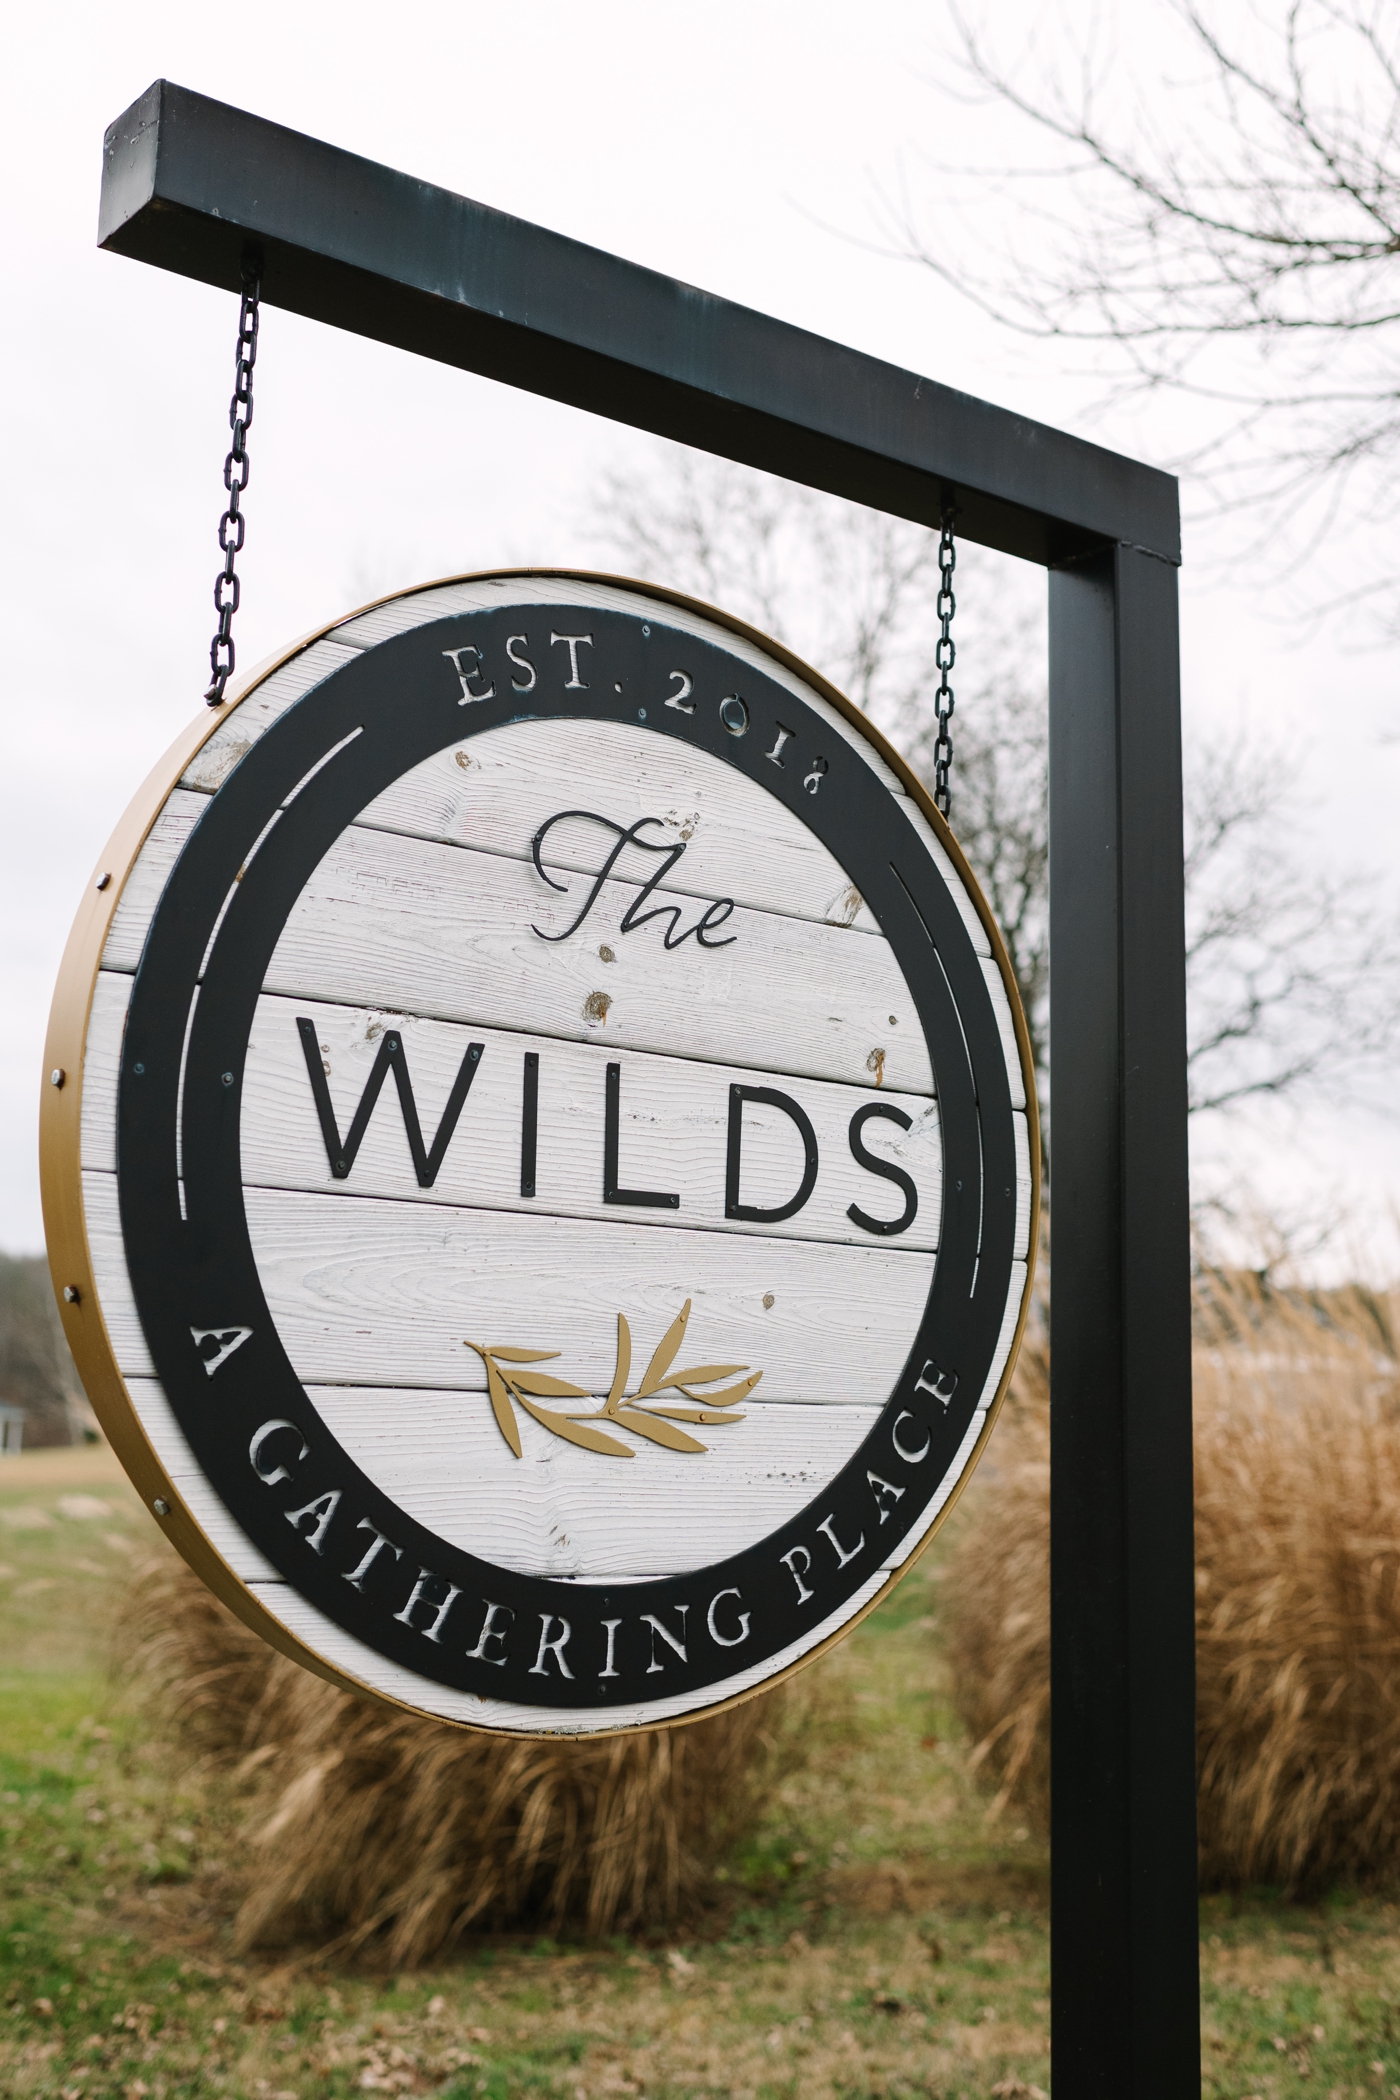 The wilds wedding venue in Indiana